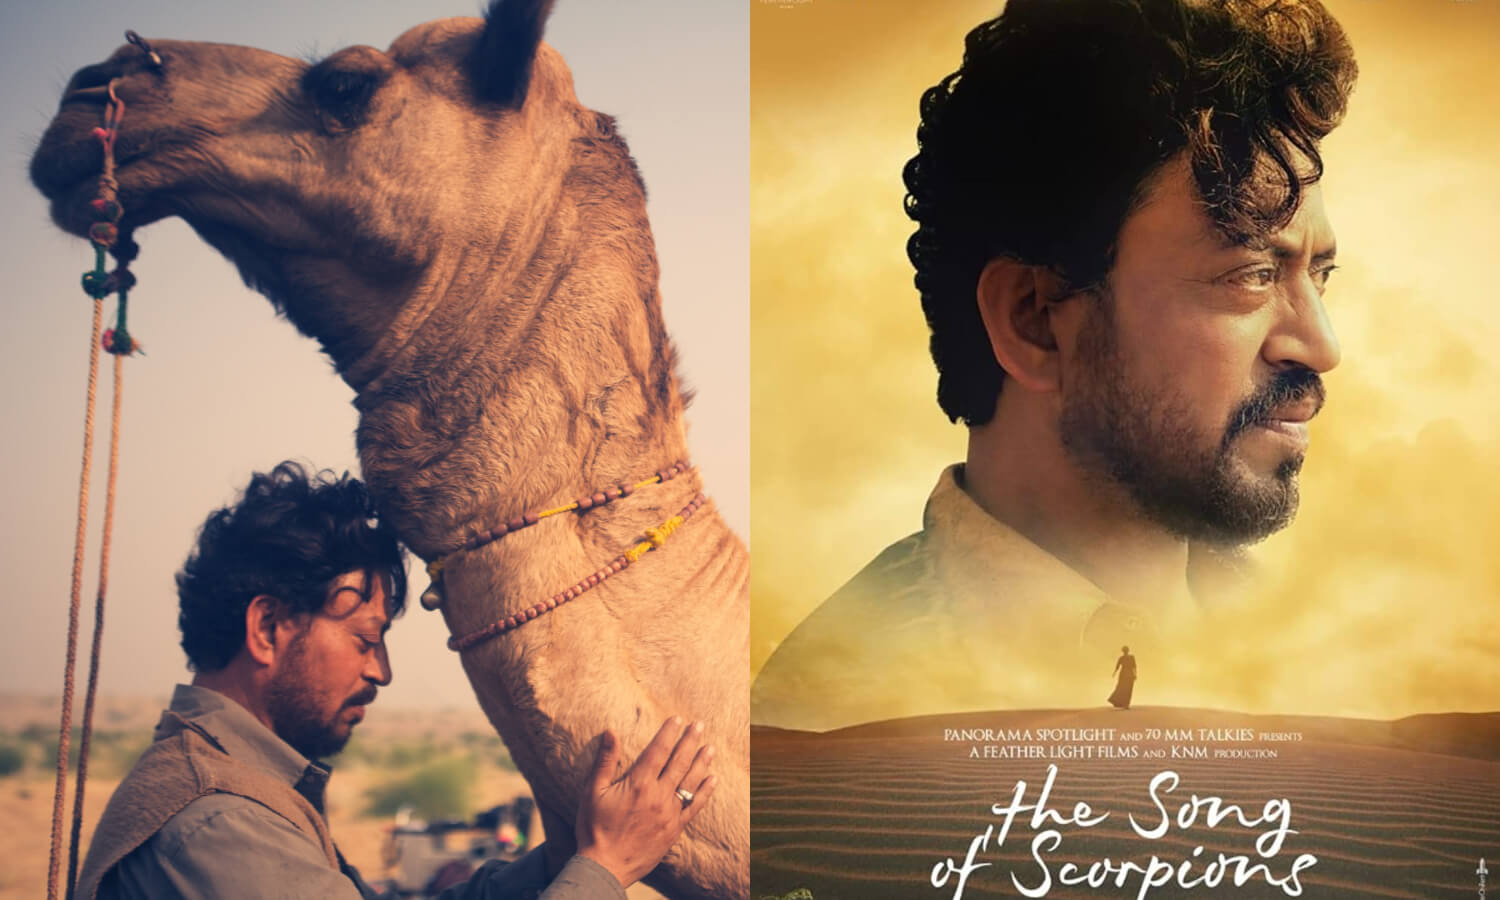 Irrfan Khan starrer 'The Song of Scorpions' to hit screens a day before the actor's third death anniversary 798814